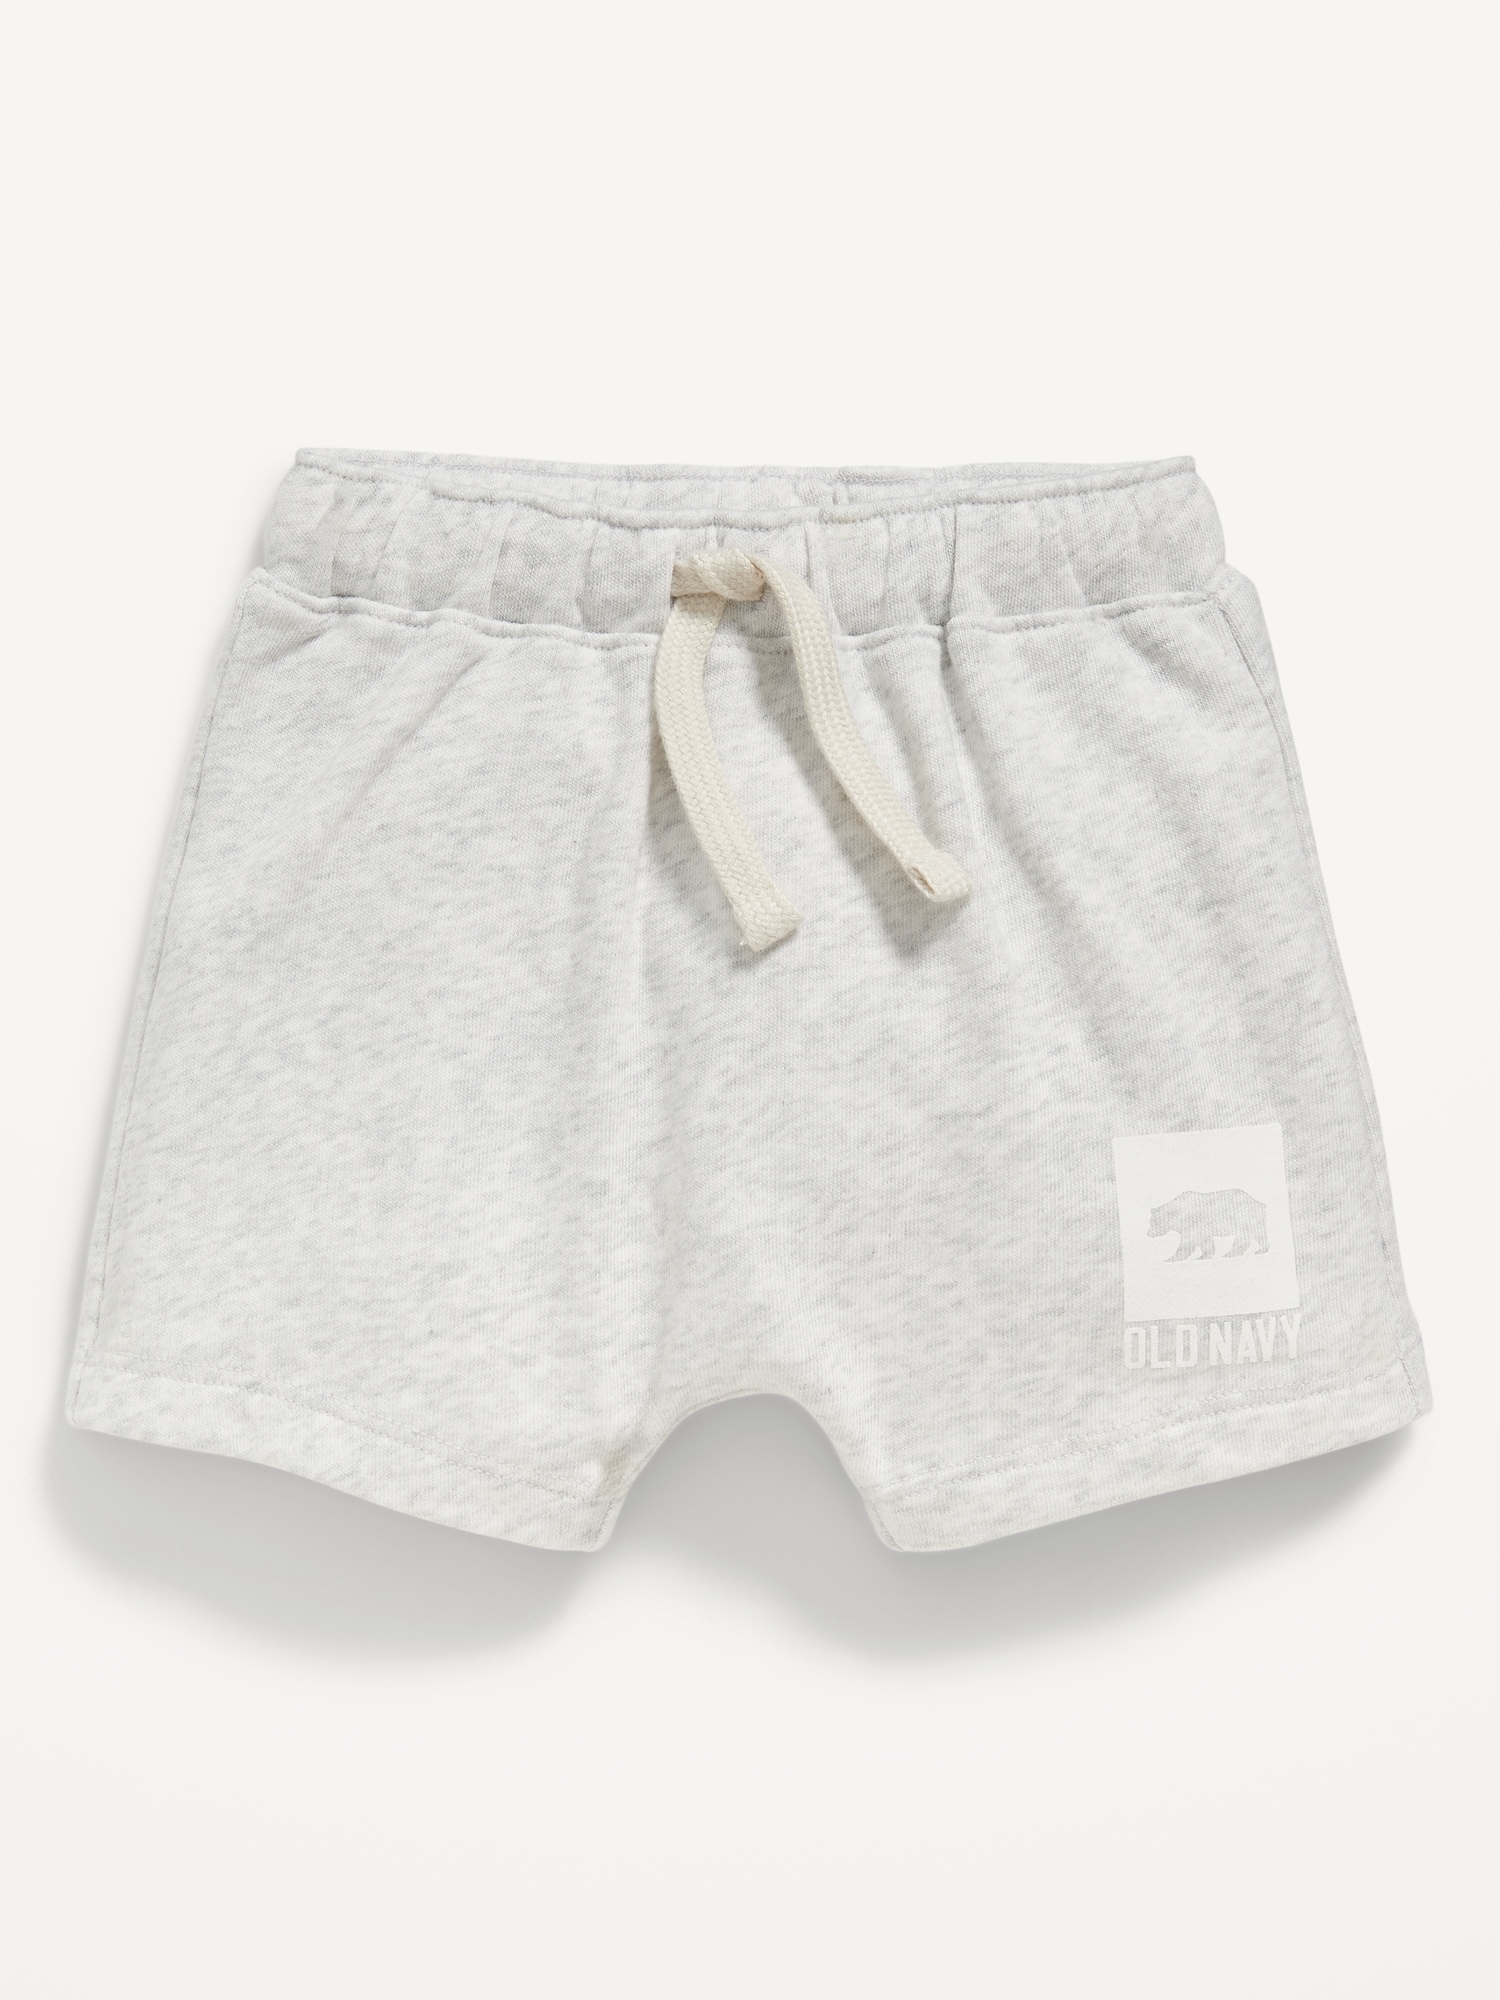 Unisex Logo-Graphic Pull-On Shorts for Baby